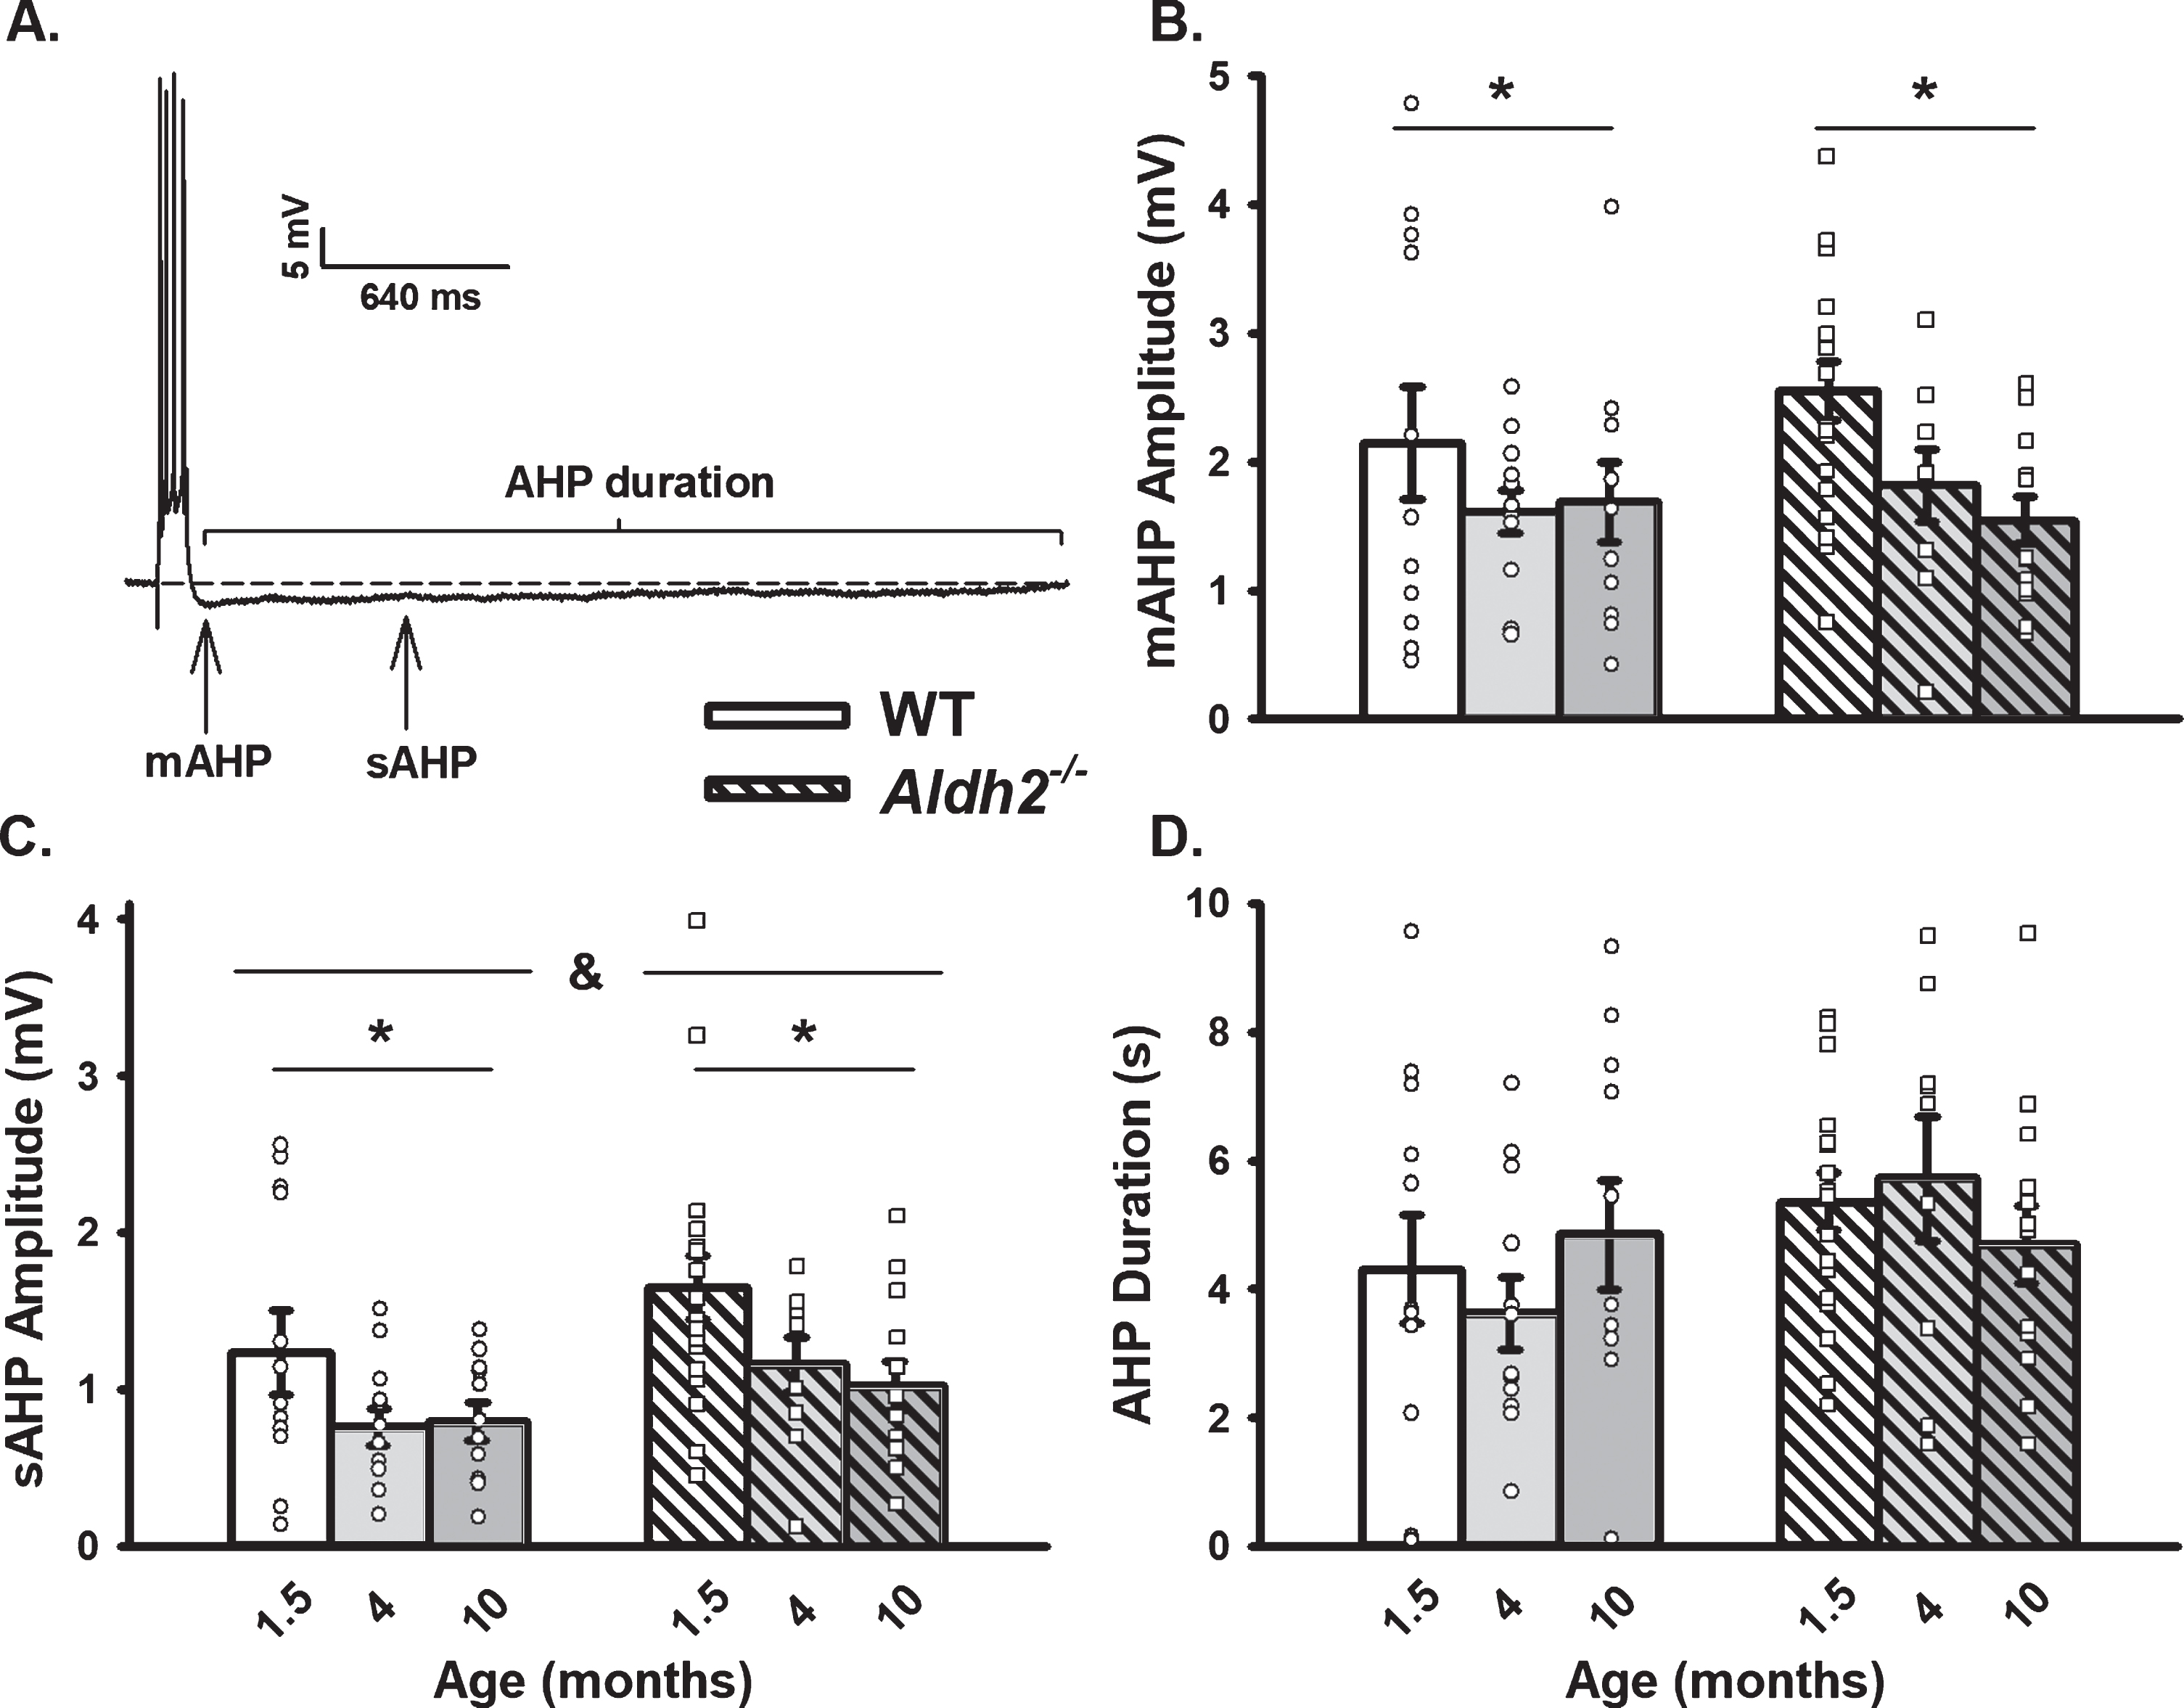 AHP in WT and Aldh2–/– Mice Across Age. A) Representative AHP following post-synaptic depolarization with 4 action potentials. B, C) A main effect of aging (p < 0.02) on the mAHP and sAHP was observed within each genotype. A main effect of genotype was also present on the sAHP (p < 0.04). D) Measures of the AHP duration were unaltered across aging or genotypes. We report data on 12 neurons (1.5 months), 11 neurons (4 months), and 11 neurons (10 months) in the WT dataset, and on 17 neurons (1.5 months), 9 neurons (4 months), and 13 neurons (10 months) in the Aldh2–/– dataset. Asterisks (*) represent significance across aging (above left and right bars) and genotype (top horizontal bar separated by an ampersand) at p < 0.05.